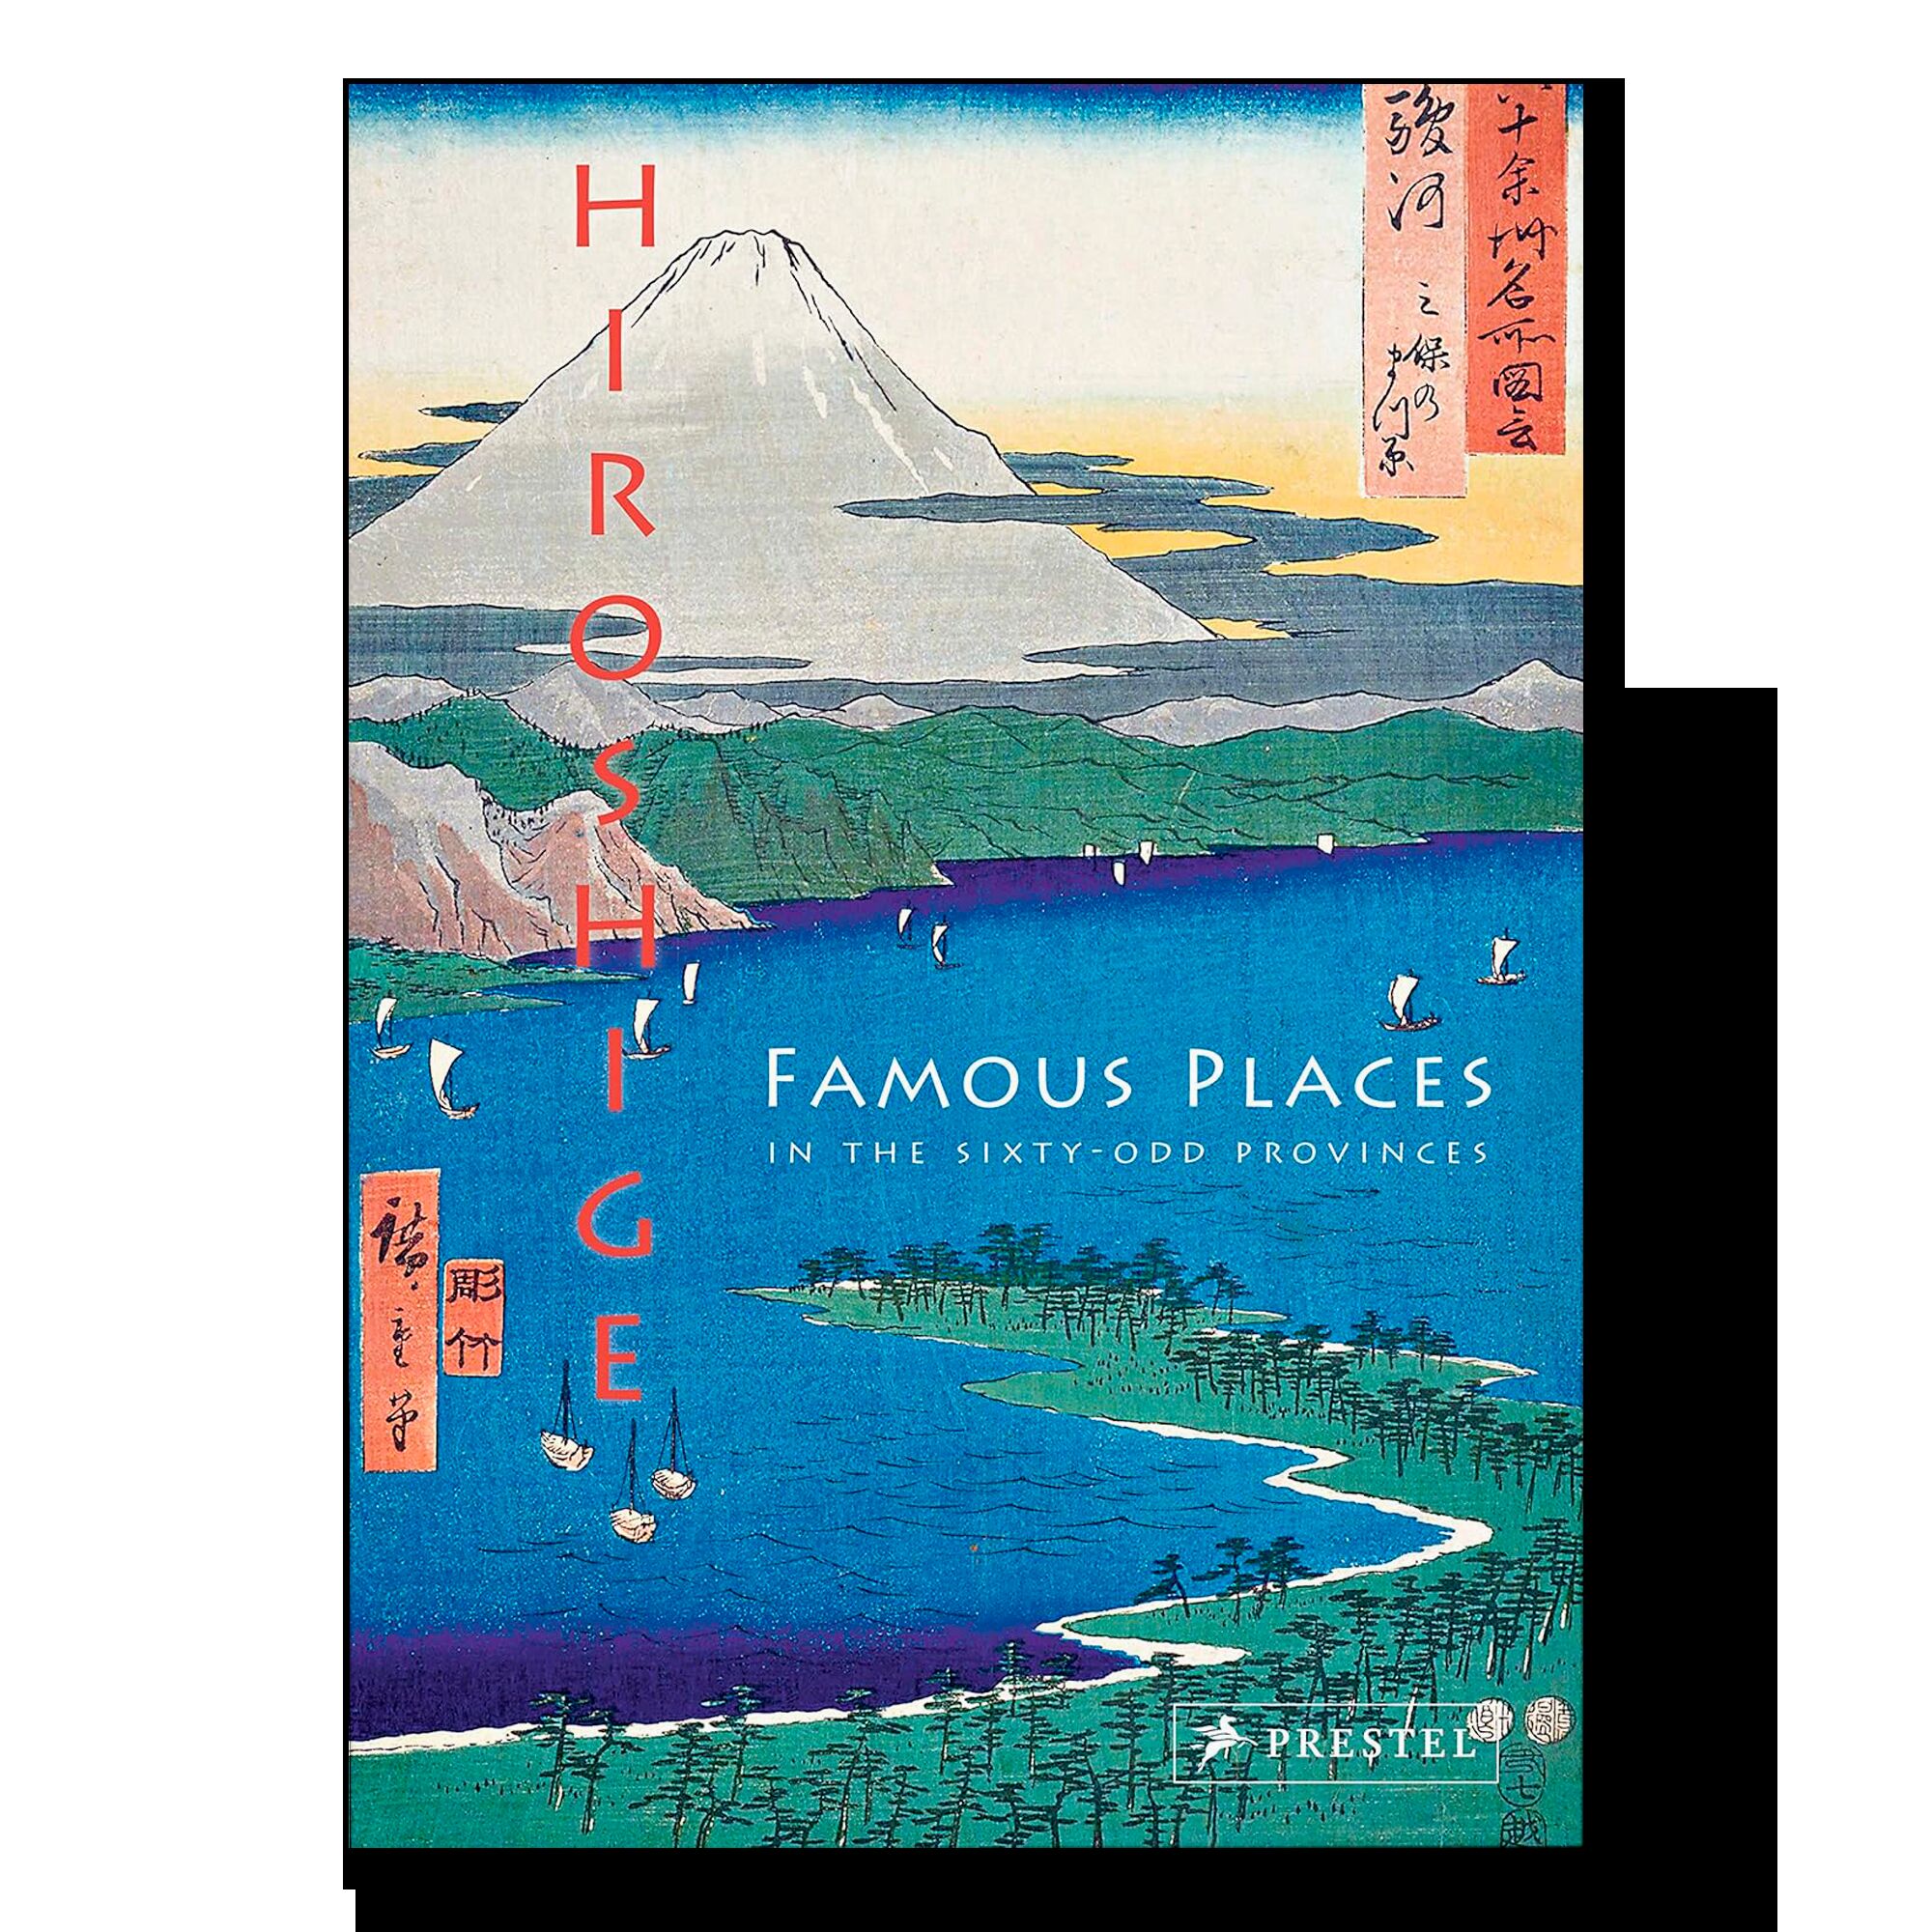 Hiroshige: Famous Places in the Sixty-odd Provinces